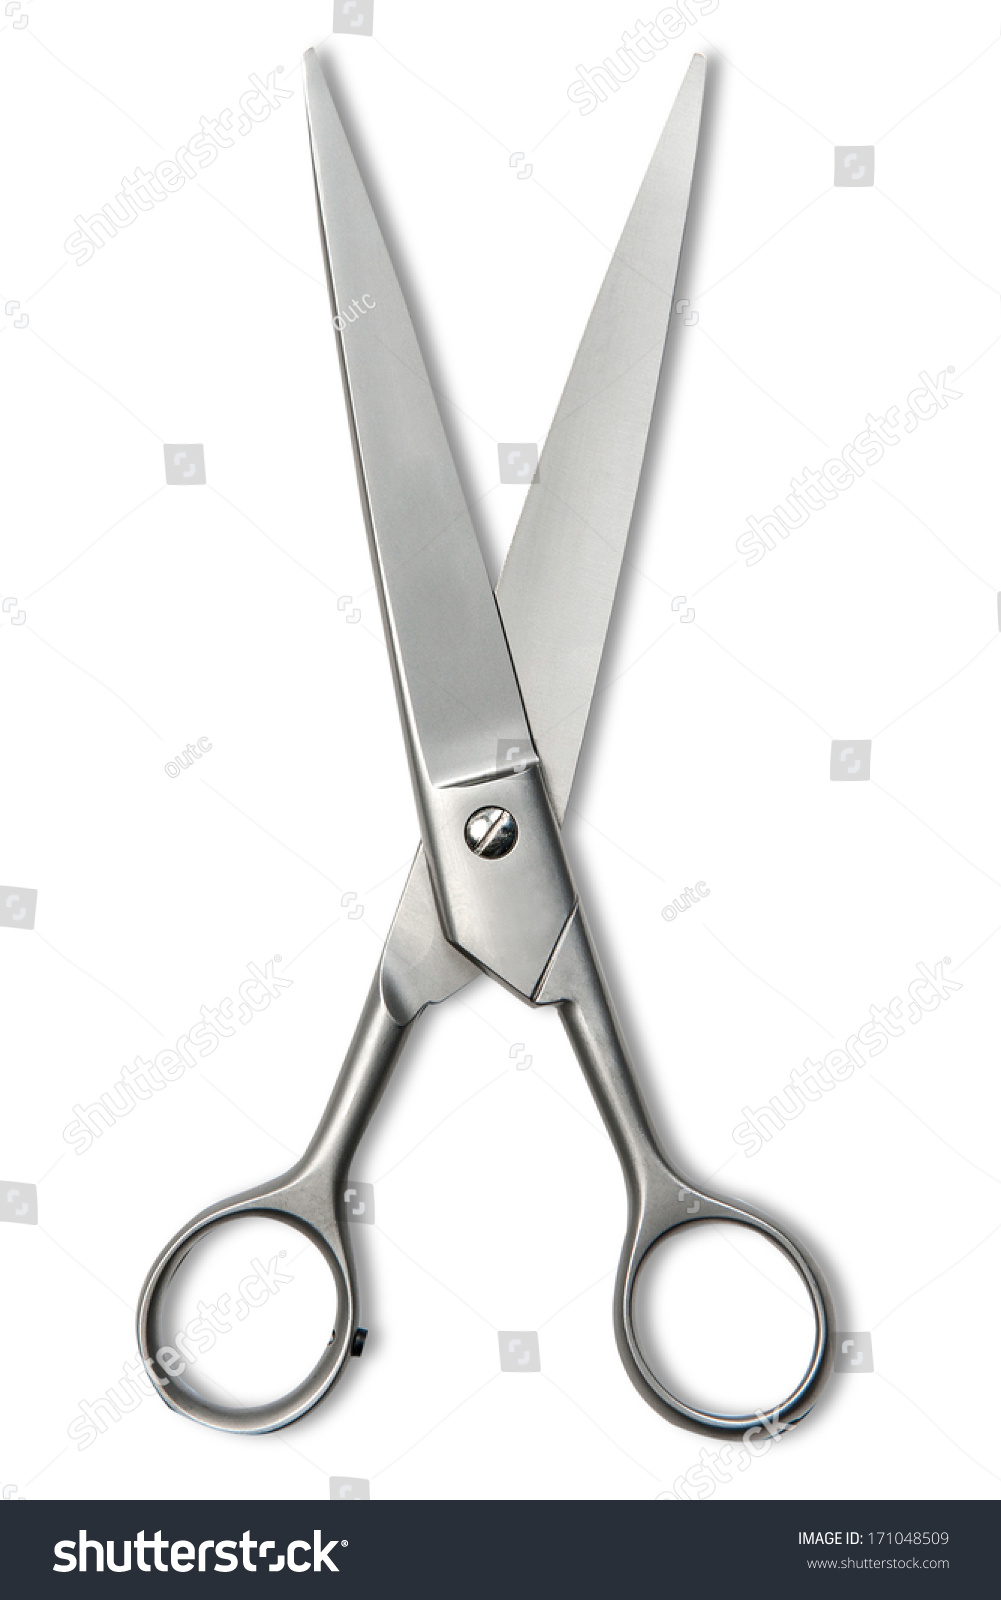 Scissors isolated on white background #171048509